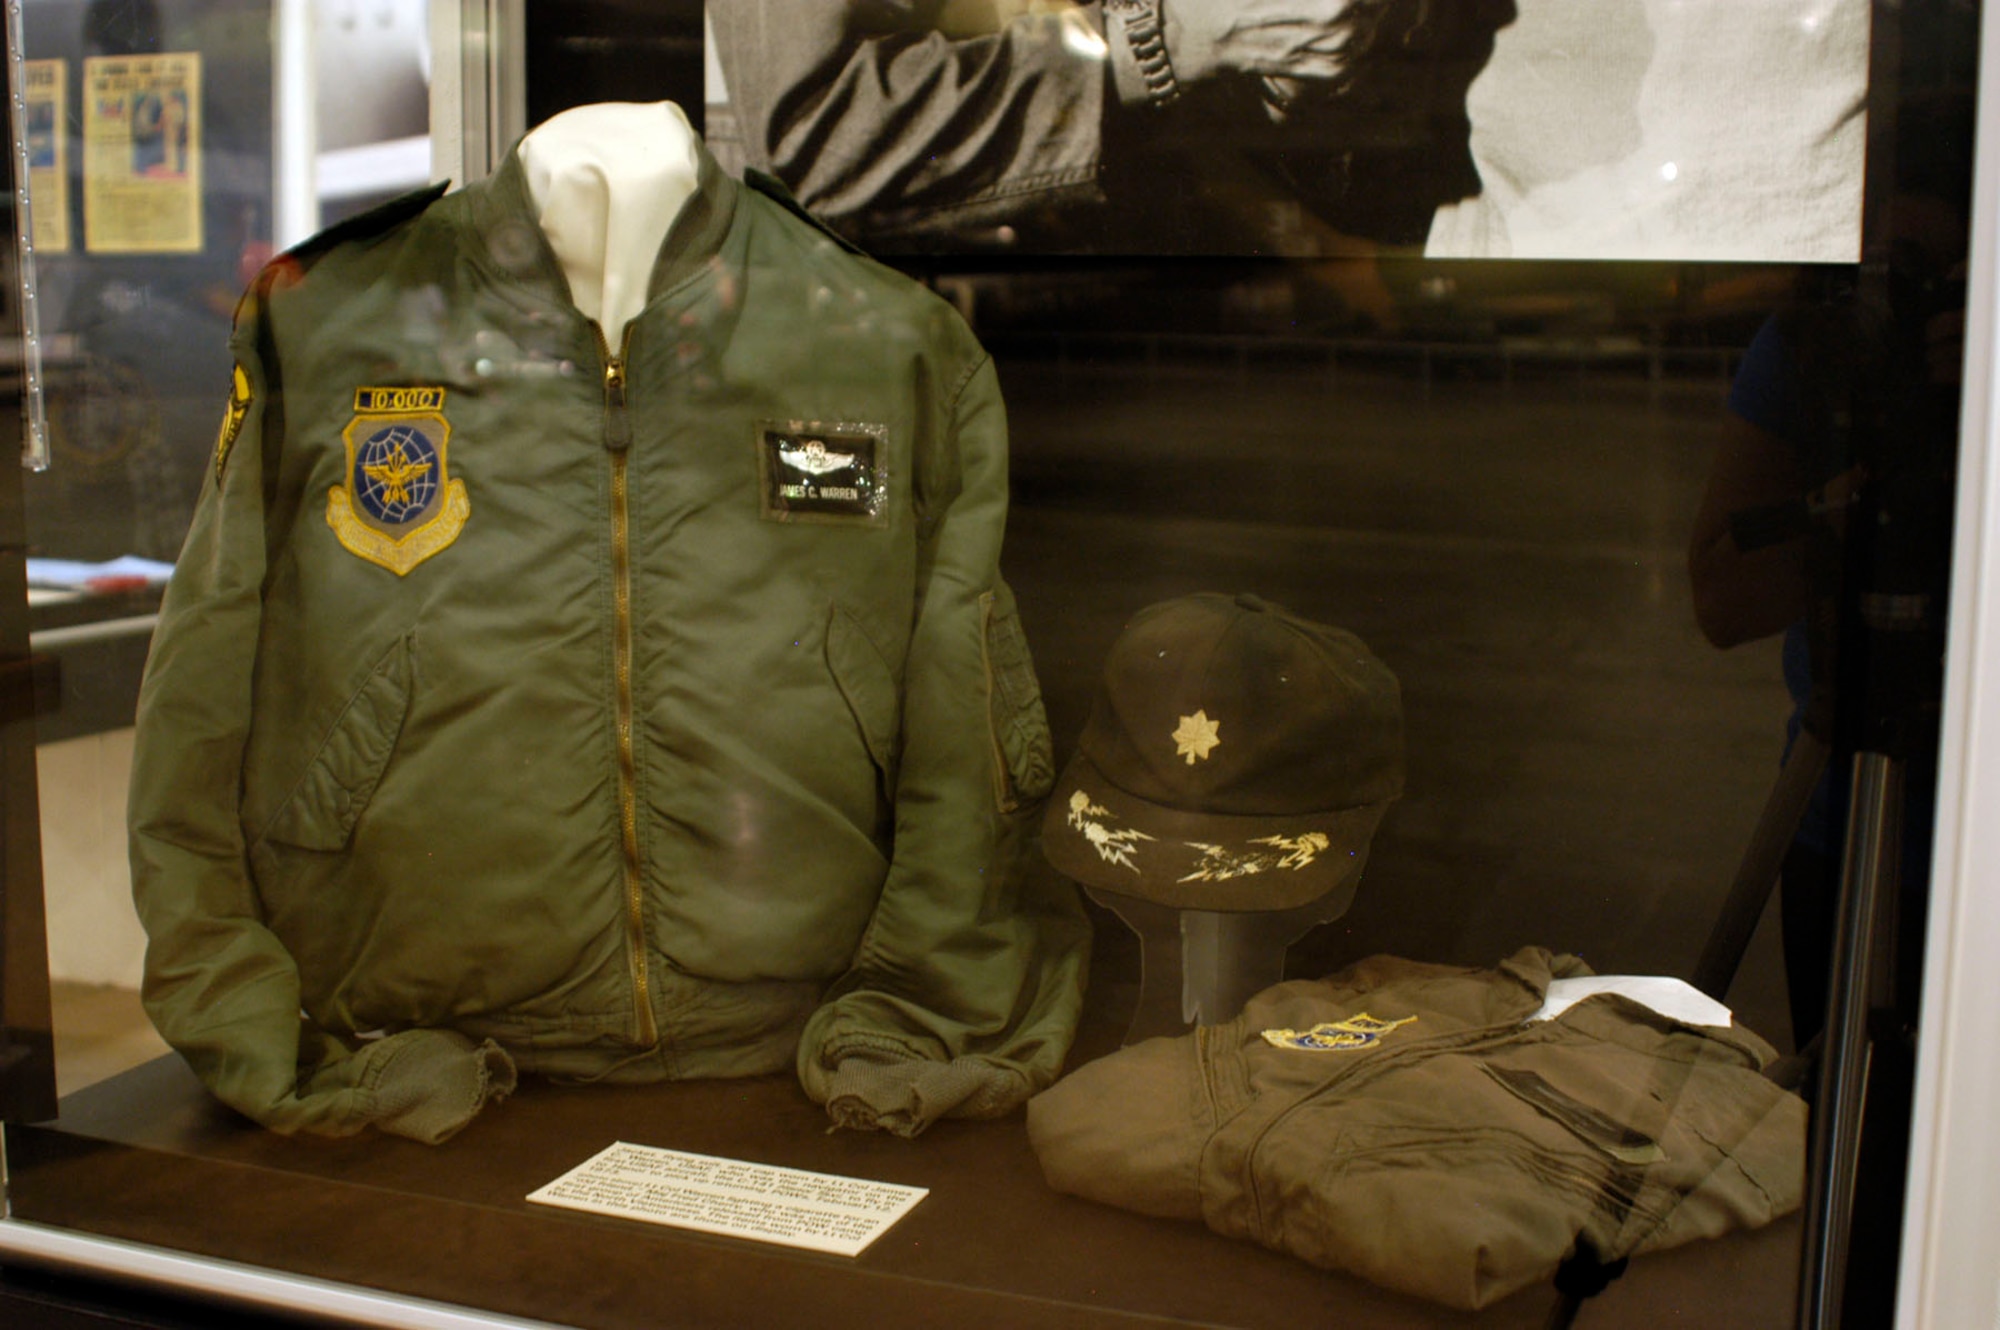 DAYTON, Ohio - Flying suit, jacket, and cap worn by Lt. Col. James C. Warren, USAF, who was the navigator on the first USAF aircraft, the C-141 Hanoi Taxi, to fly into Hanoi to pick up returning POWs, Feb. 12, 1973. These items are on display in the Southeast Asia War Gallery at the National Museum of the U.S. Air Force. (U.S. Air Force photo)